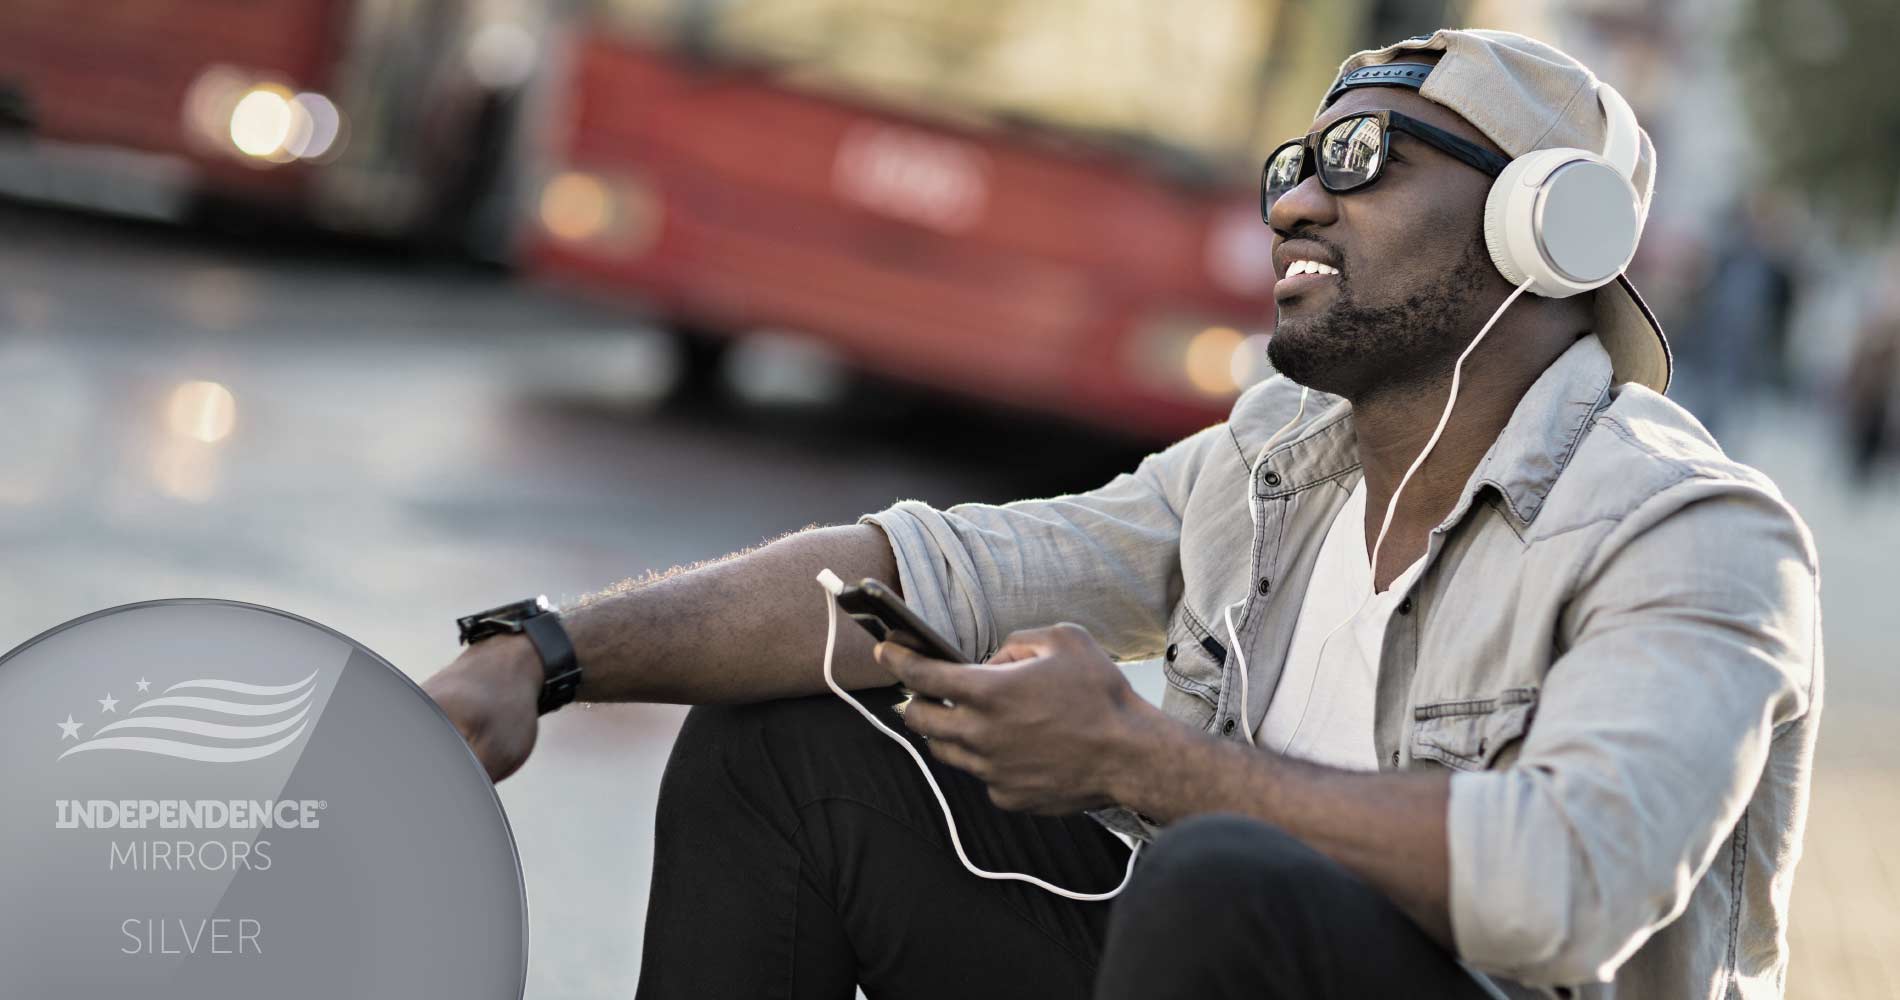 Man sitting on the curb listening to music with headphones, wearing silver-colored mirrored sunglasses